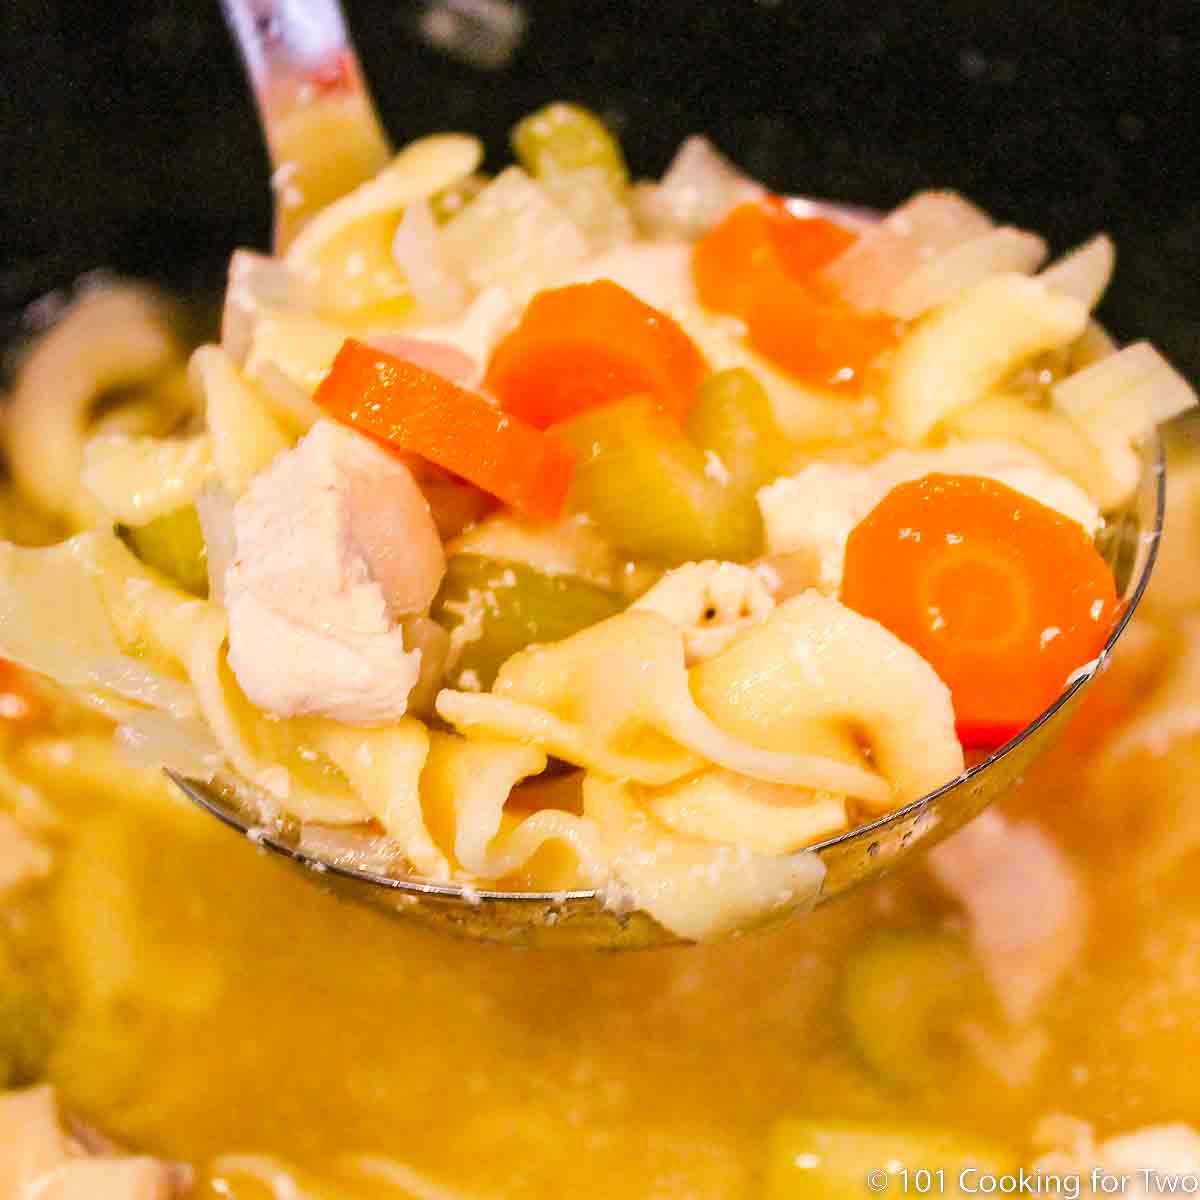 Easy Crockpot Chicken Noodle Soup Recipe - How to Make Slow Cooker